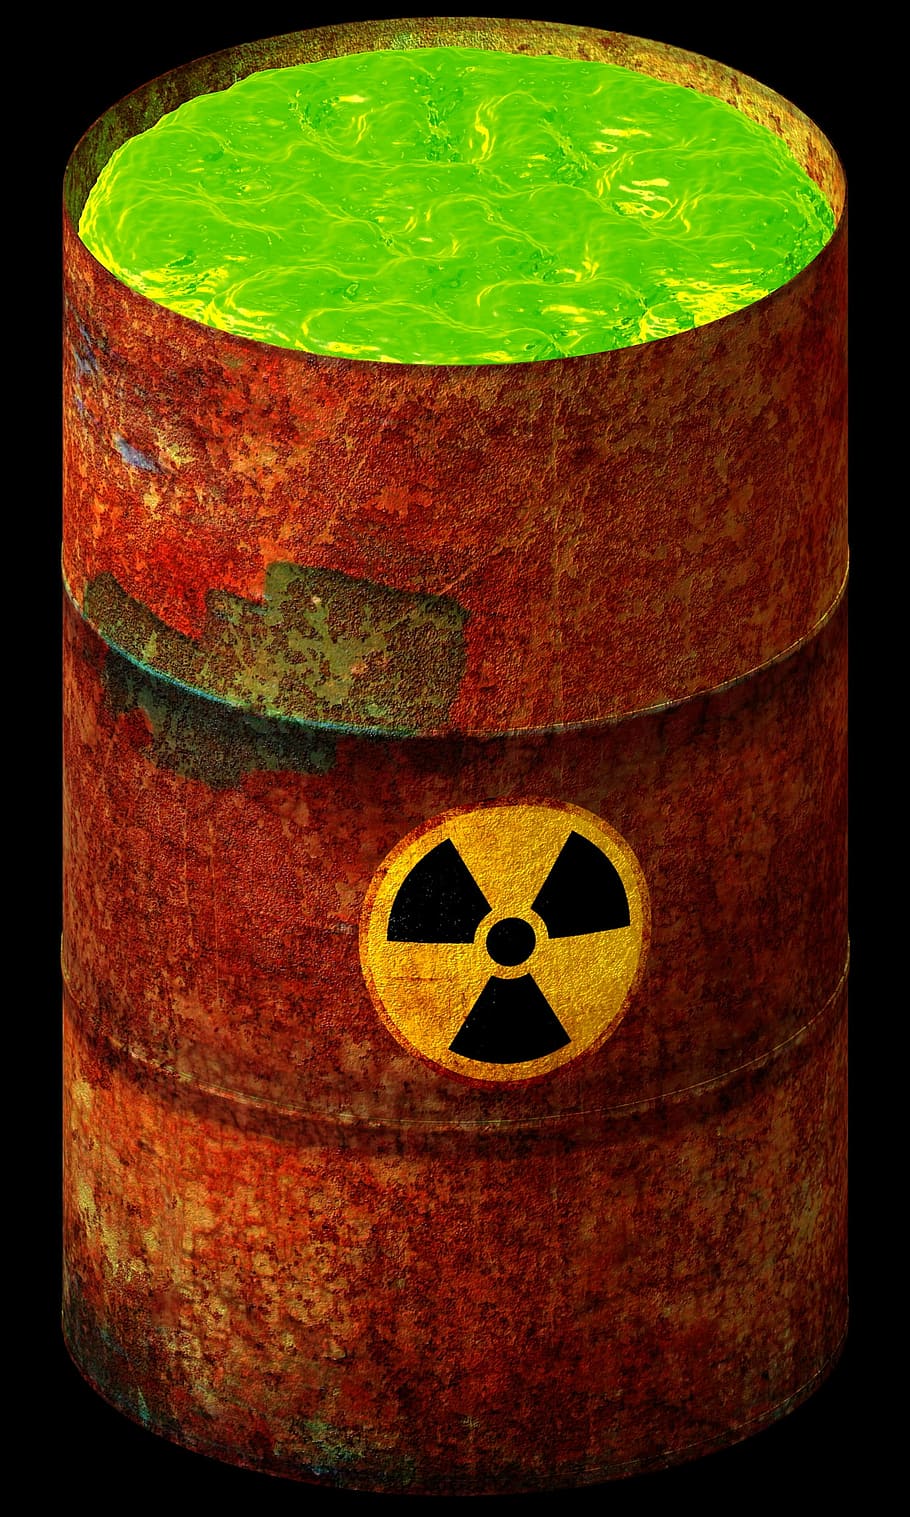 rusty brown drum, nuclear, waste, radioactive, toxic, danger, radiation, environment, pollution, ecology